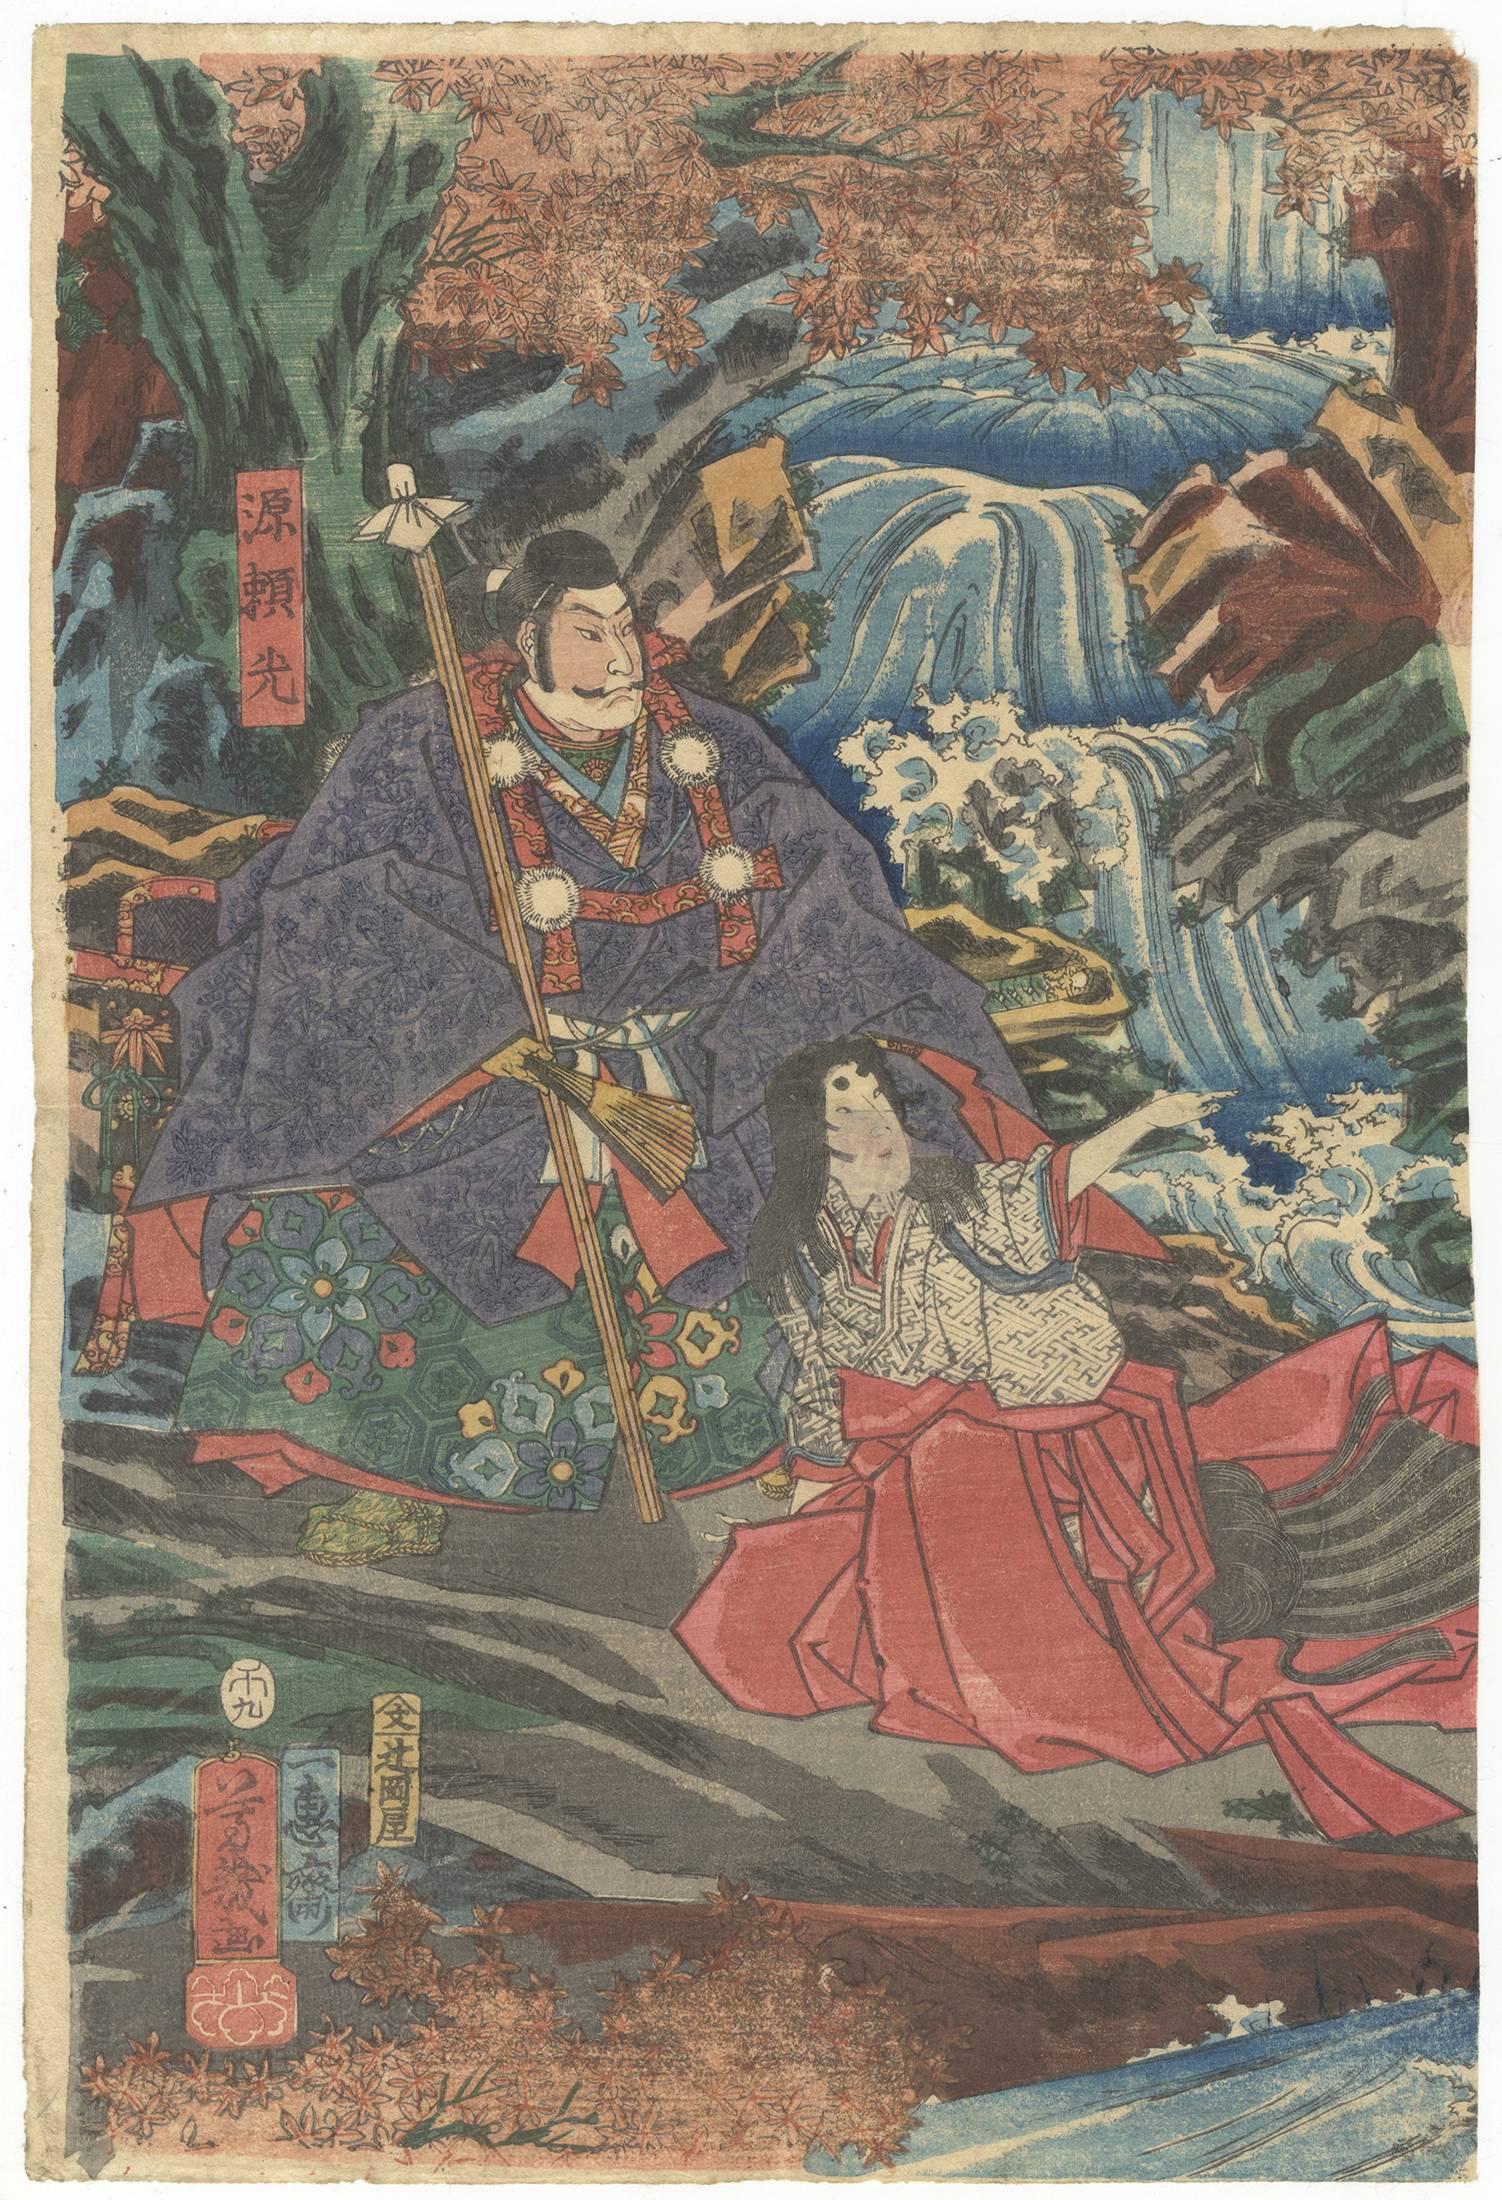 Artist: Yoshiiku Utagawa (1833-1904)
Title: The Picture of Lord Yorimitsu Entering Mt. Oe
Publisher: Tsujiokaya
Date: 1858
(R) 24.9 x 37.3  (C) 25.2 x 37.2  (L) 25 x 37.2 
Condition: Some minor tears and holes. Paper residue from previous